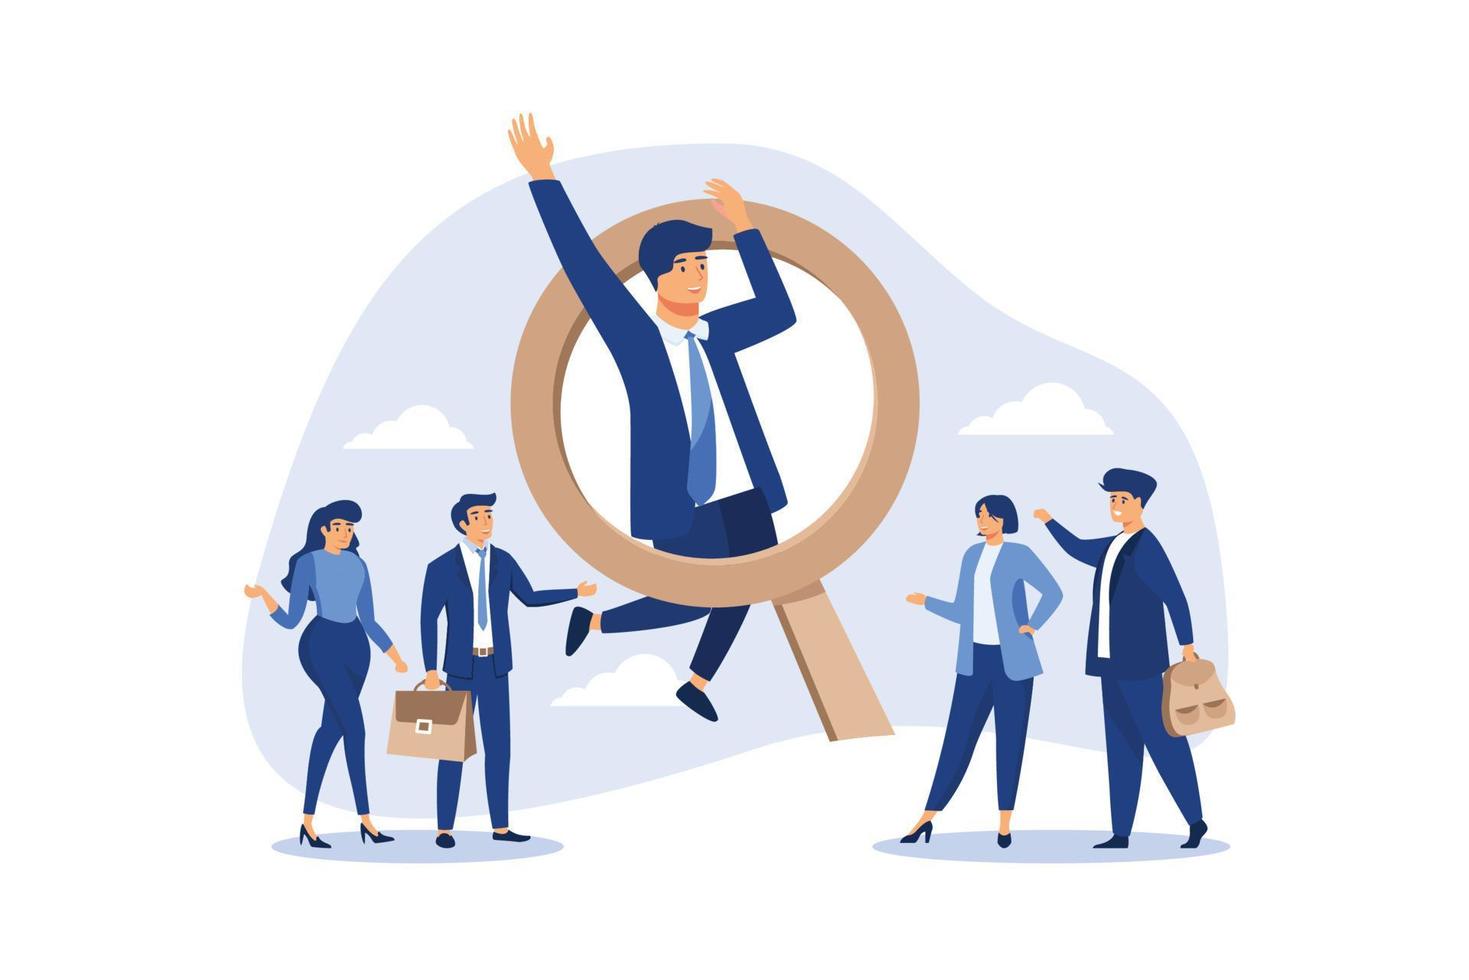 Outstanding winner candidate for job position, stand out from the crowd, notable, different or distinct person concept, confidence businessman stand out on human resource magnifying glass recruitment. vector